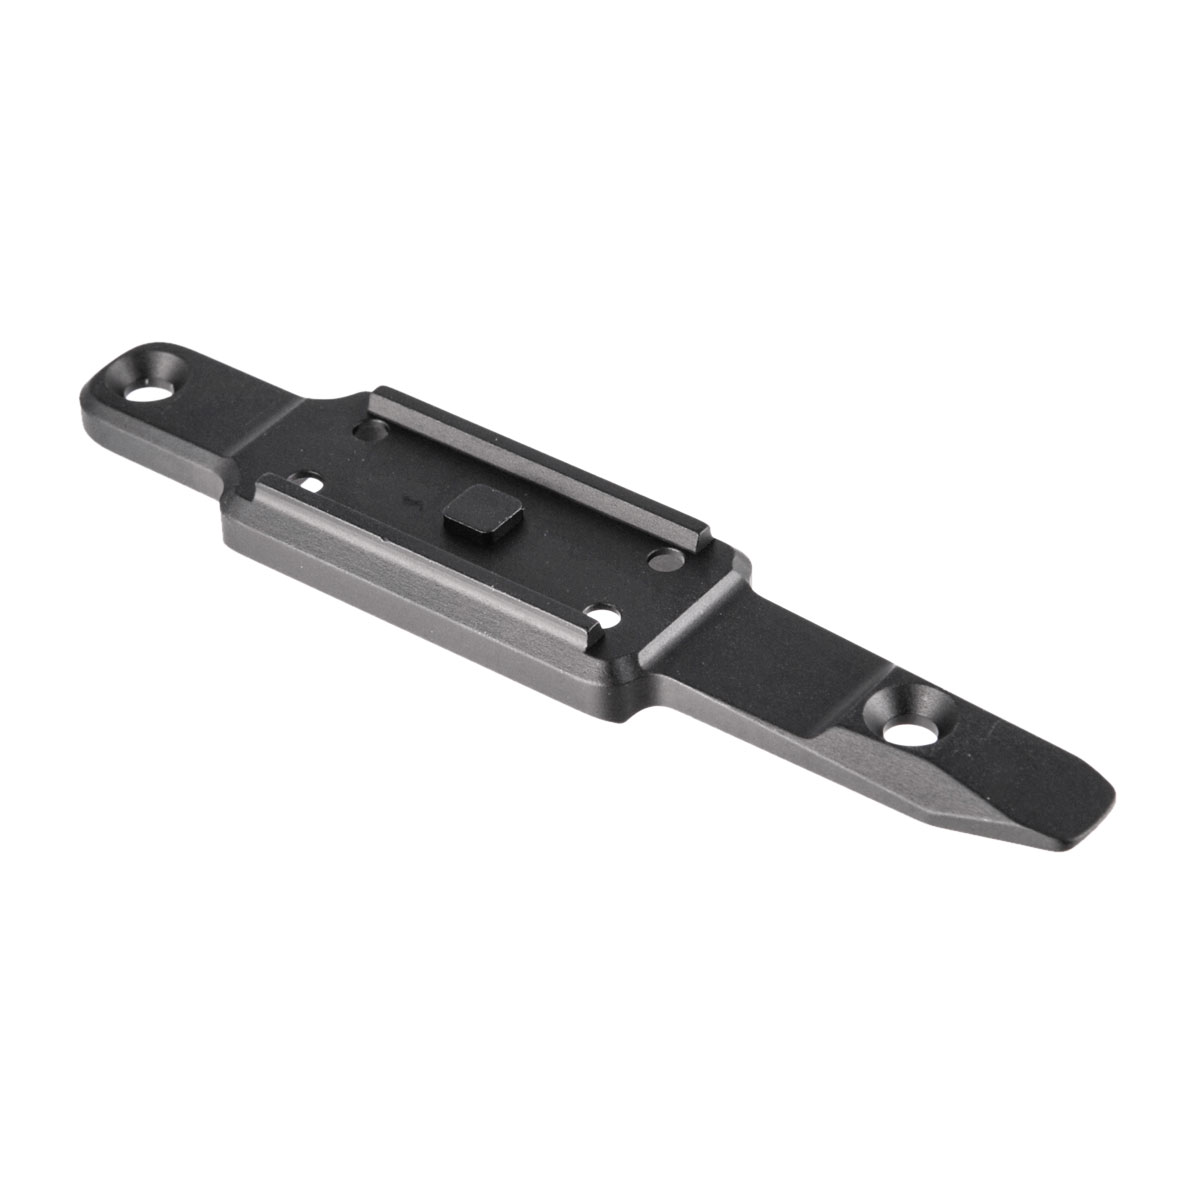 SCALARWORKS - SYNC MOUNT FOR BENELLI M4/M2/SBE